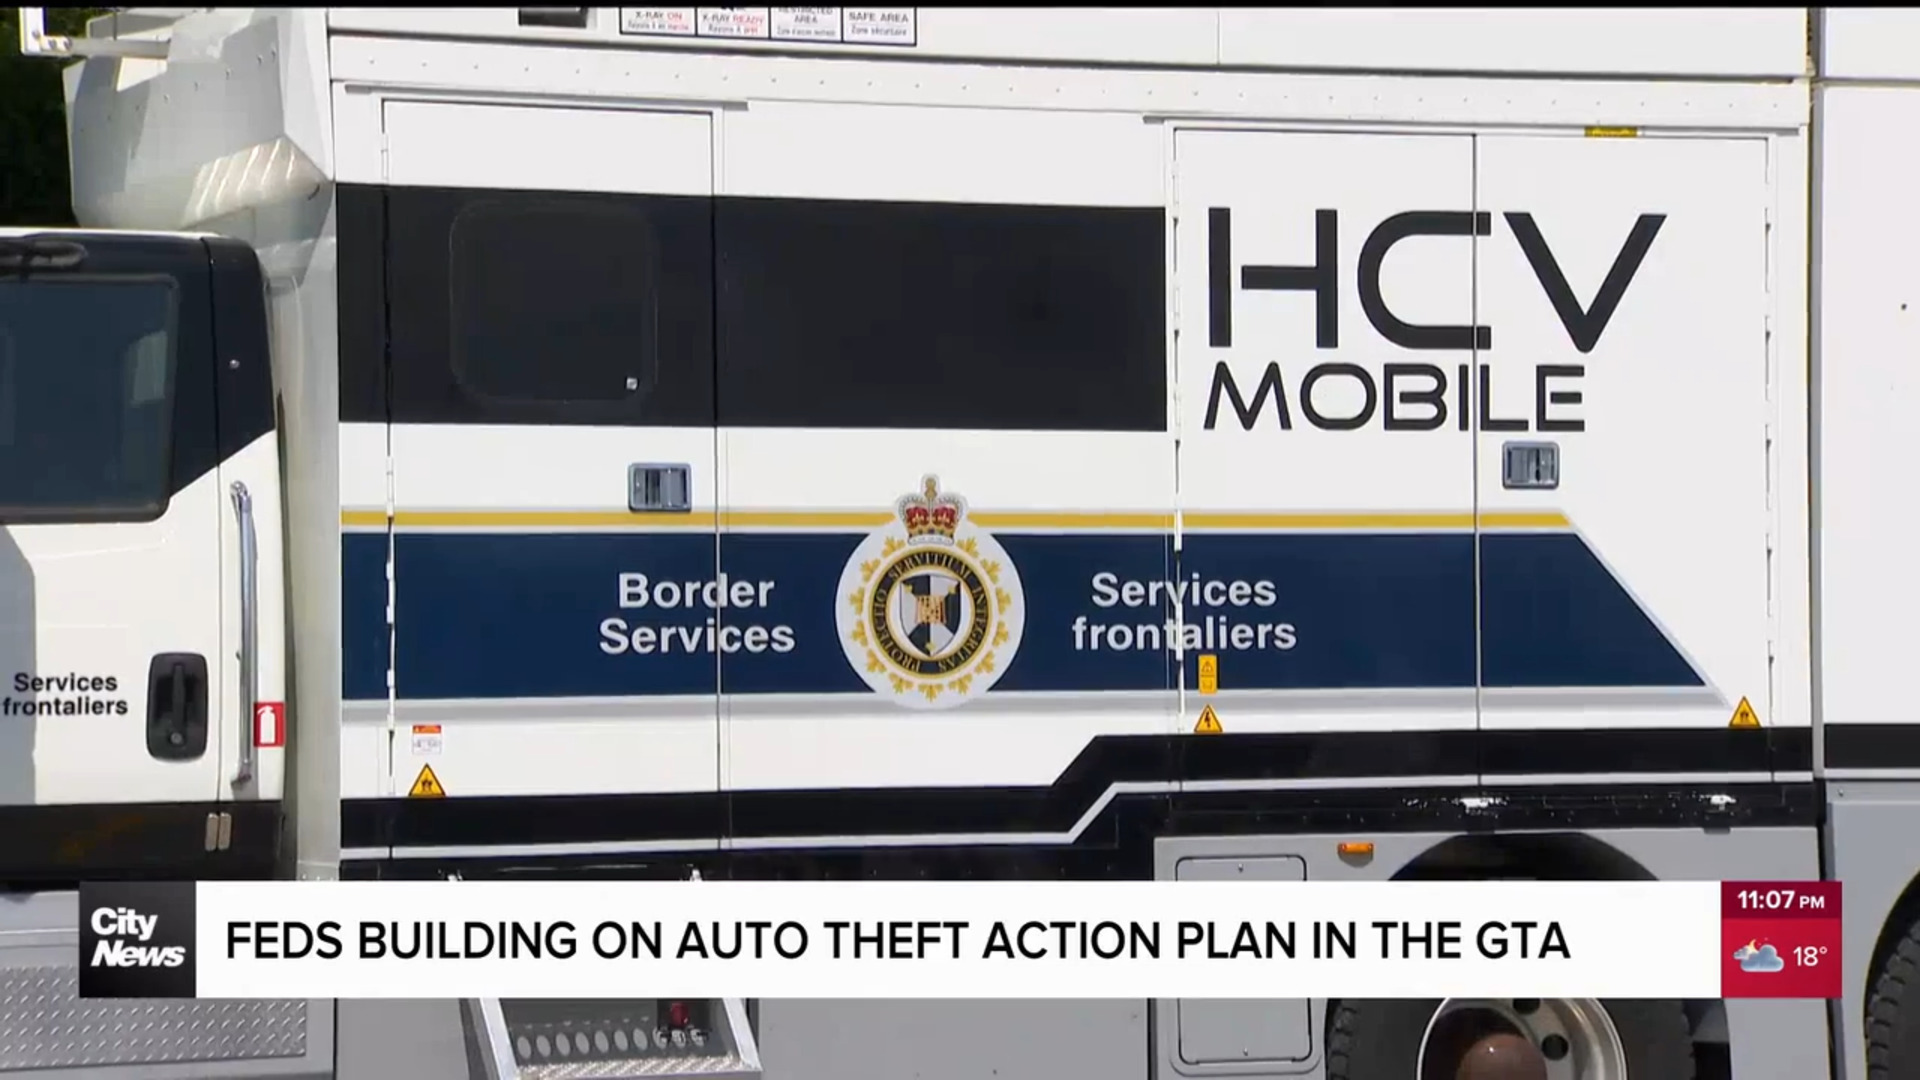 CBSA mobile x-ray scanner deployed in GTA to help address auto thefts